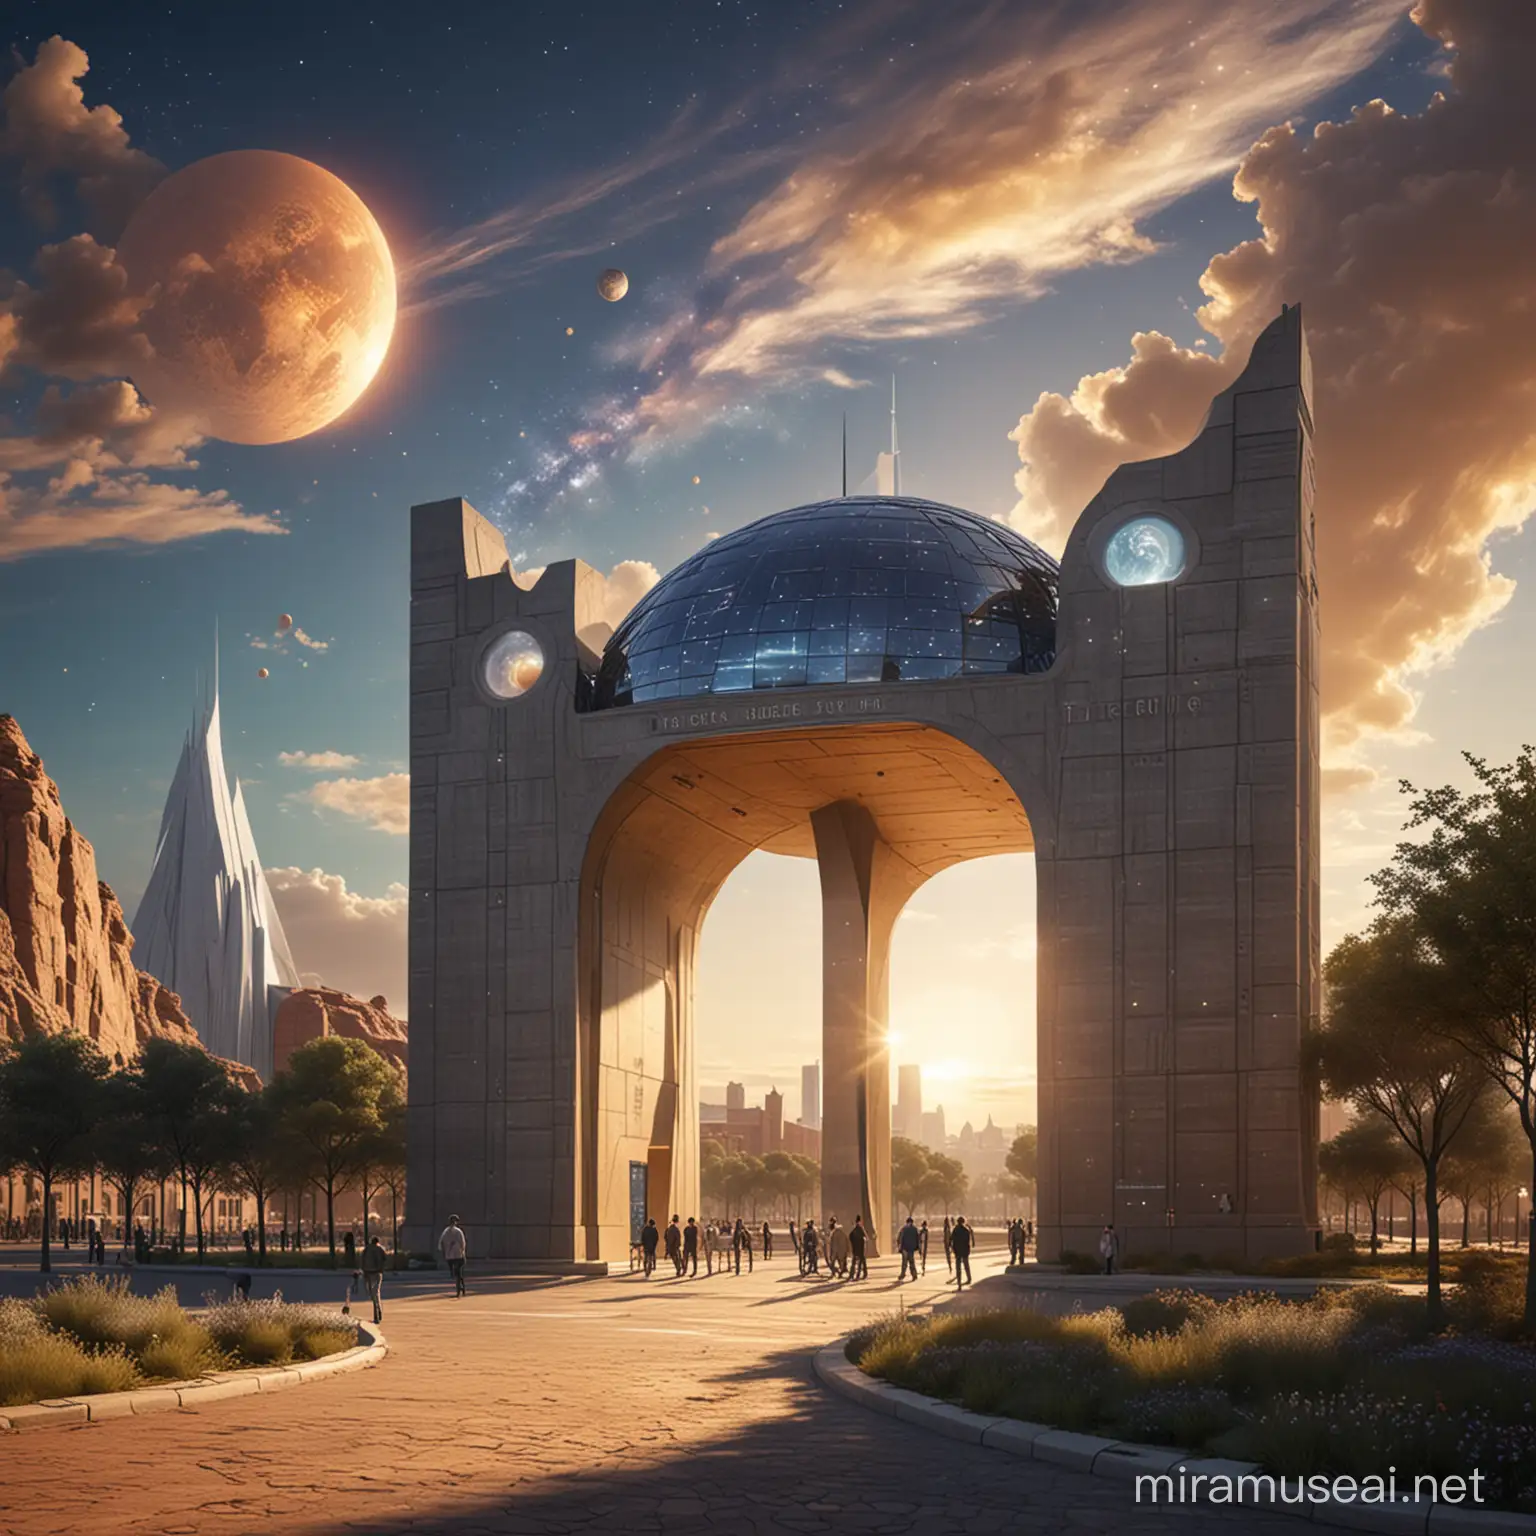 Solar System Inspired City of Scientific Inventions